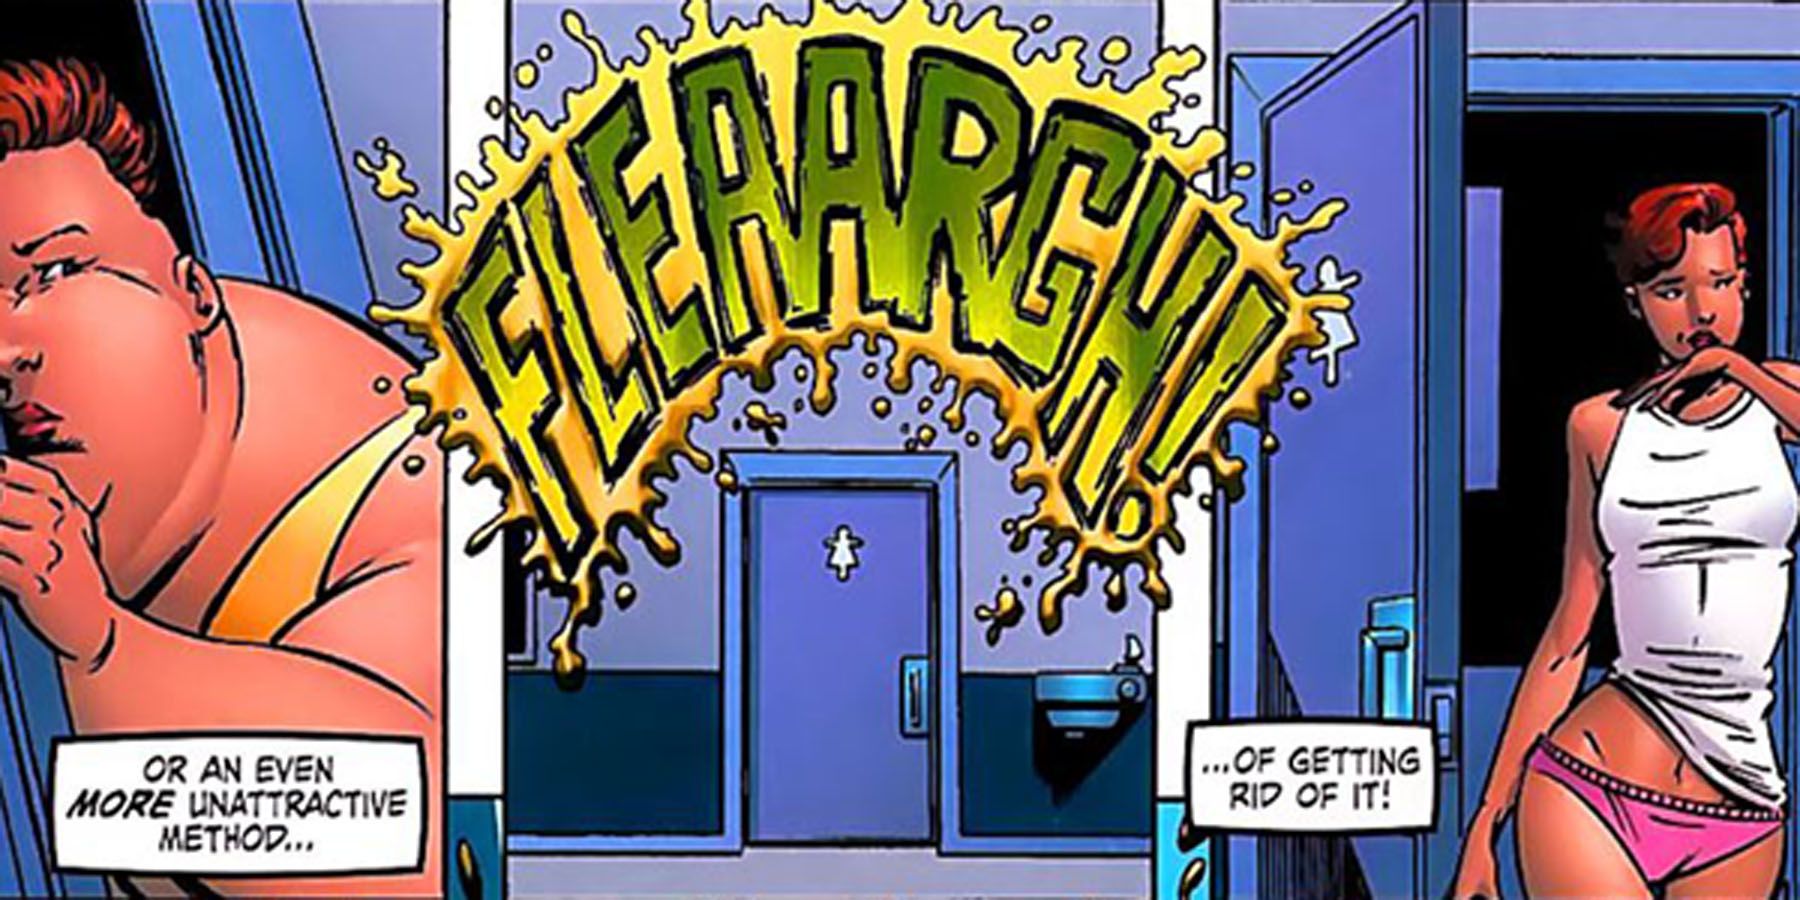 Big Bertha of the Great Lakes Avengers makes herself throw up